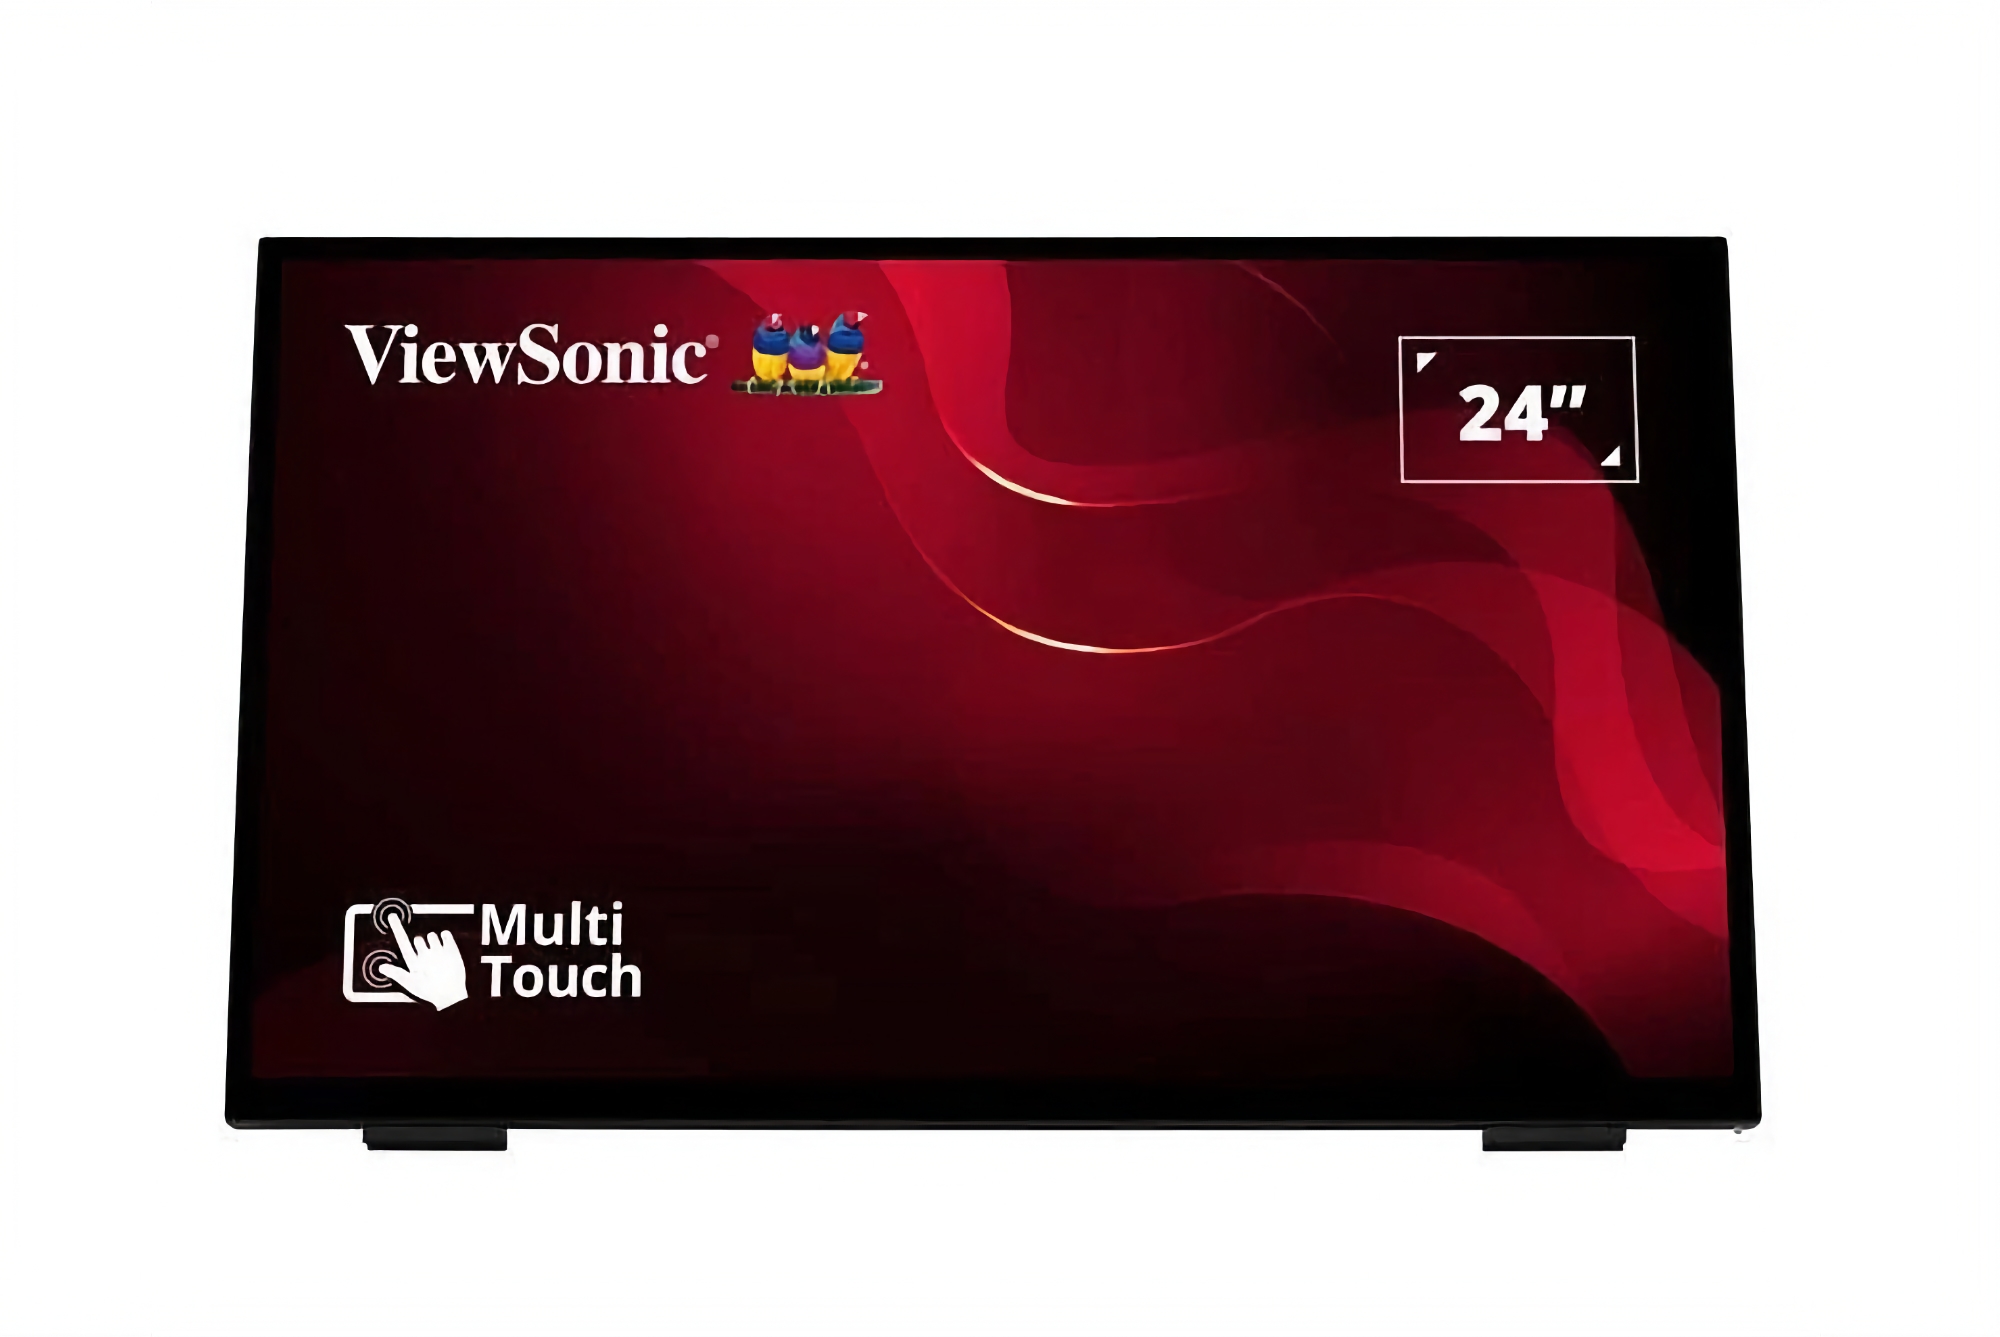 ViewSonic TD2465-CN: 23.8-inch FHD monitor with touchscreen display